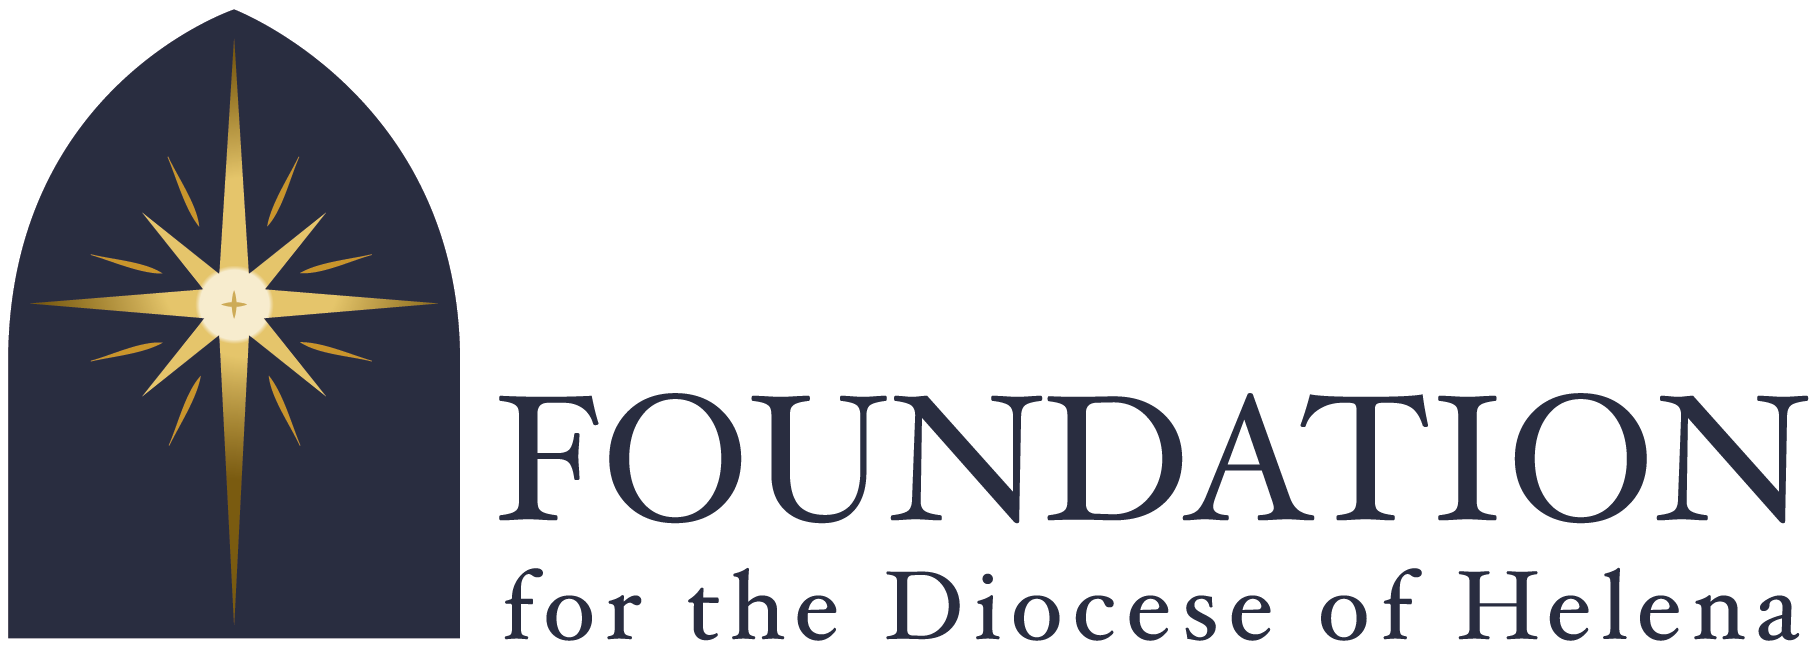 Foundation for the Diocese of Helena